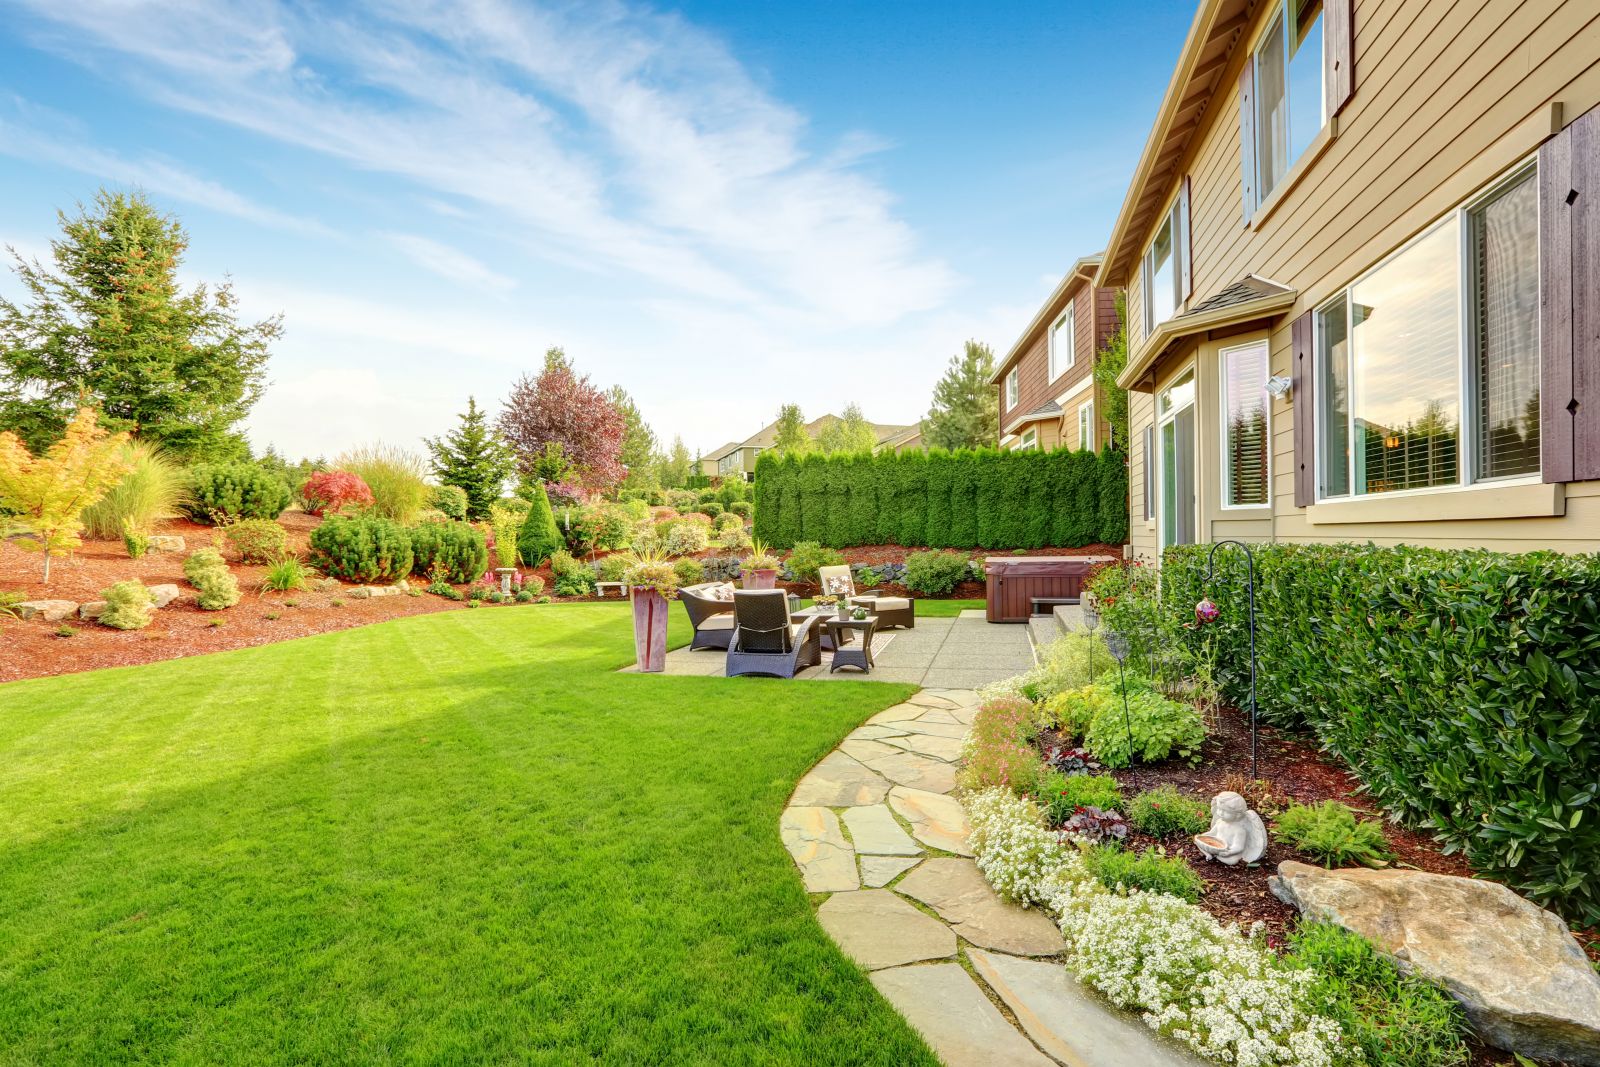 5 Essential Tips for Choosing the Best Landscaping Service